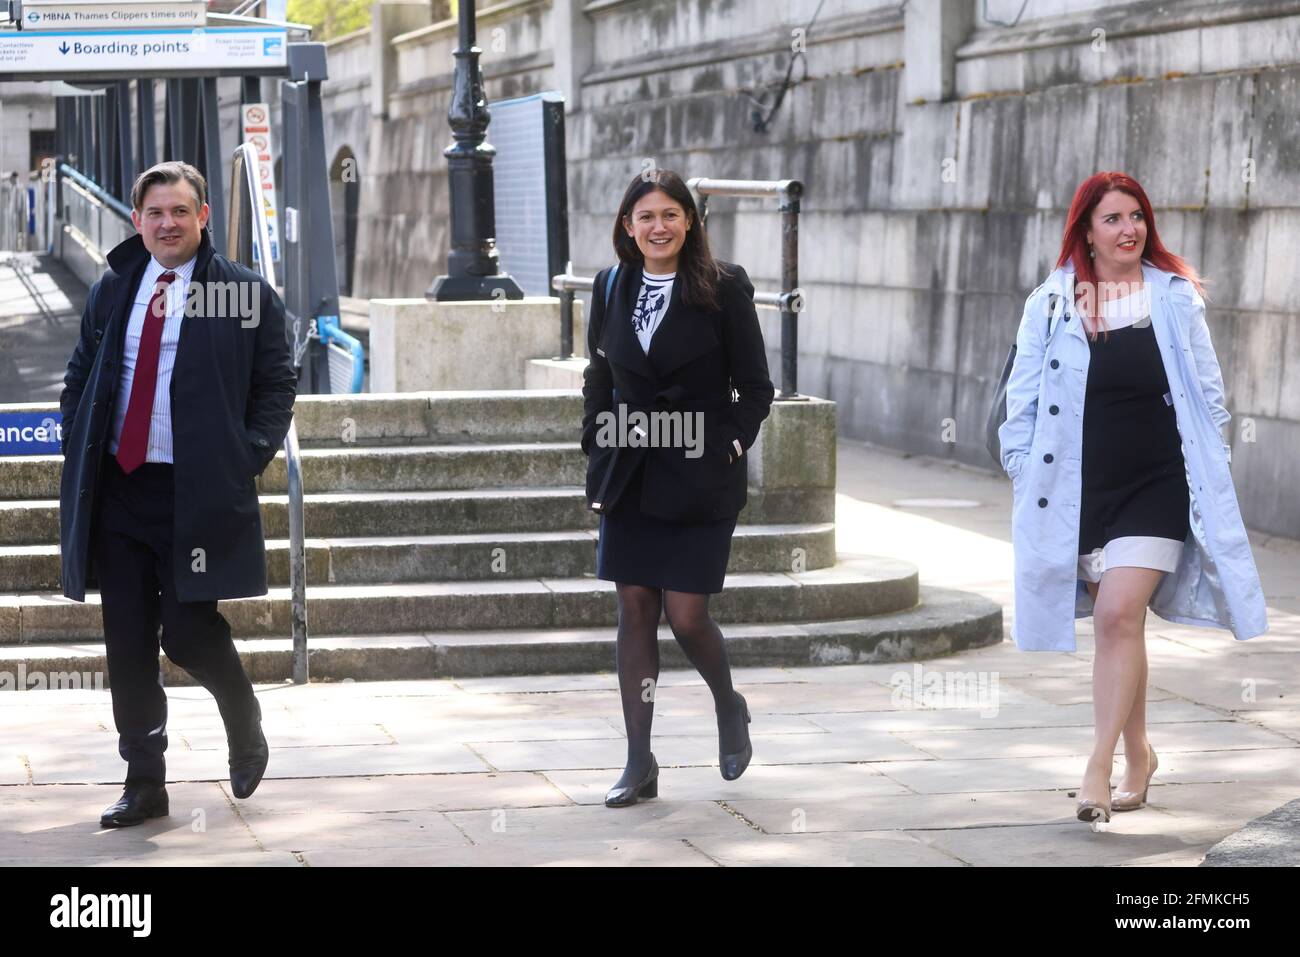 Britain S Labour Party S Jonathan Ashworth Lisa Nandy And Shadow Secretary Of State For Northern Ireland Louise Haigh Walk Through Westminster In London Britain May 10 21 Reuters Henry Nicholls Stock Photo Alamy